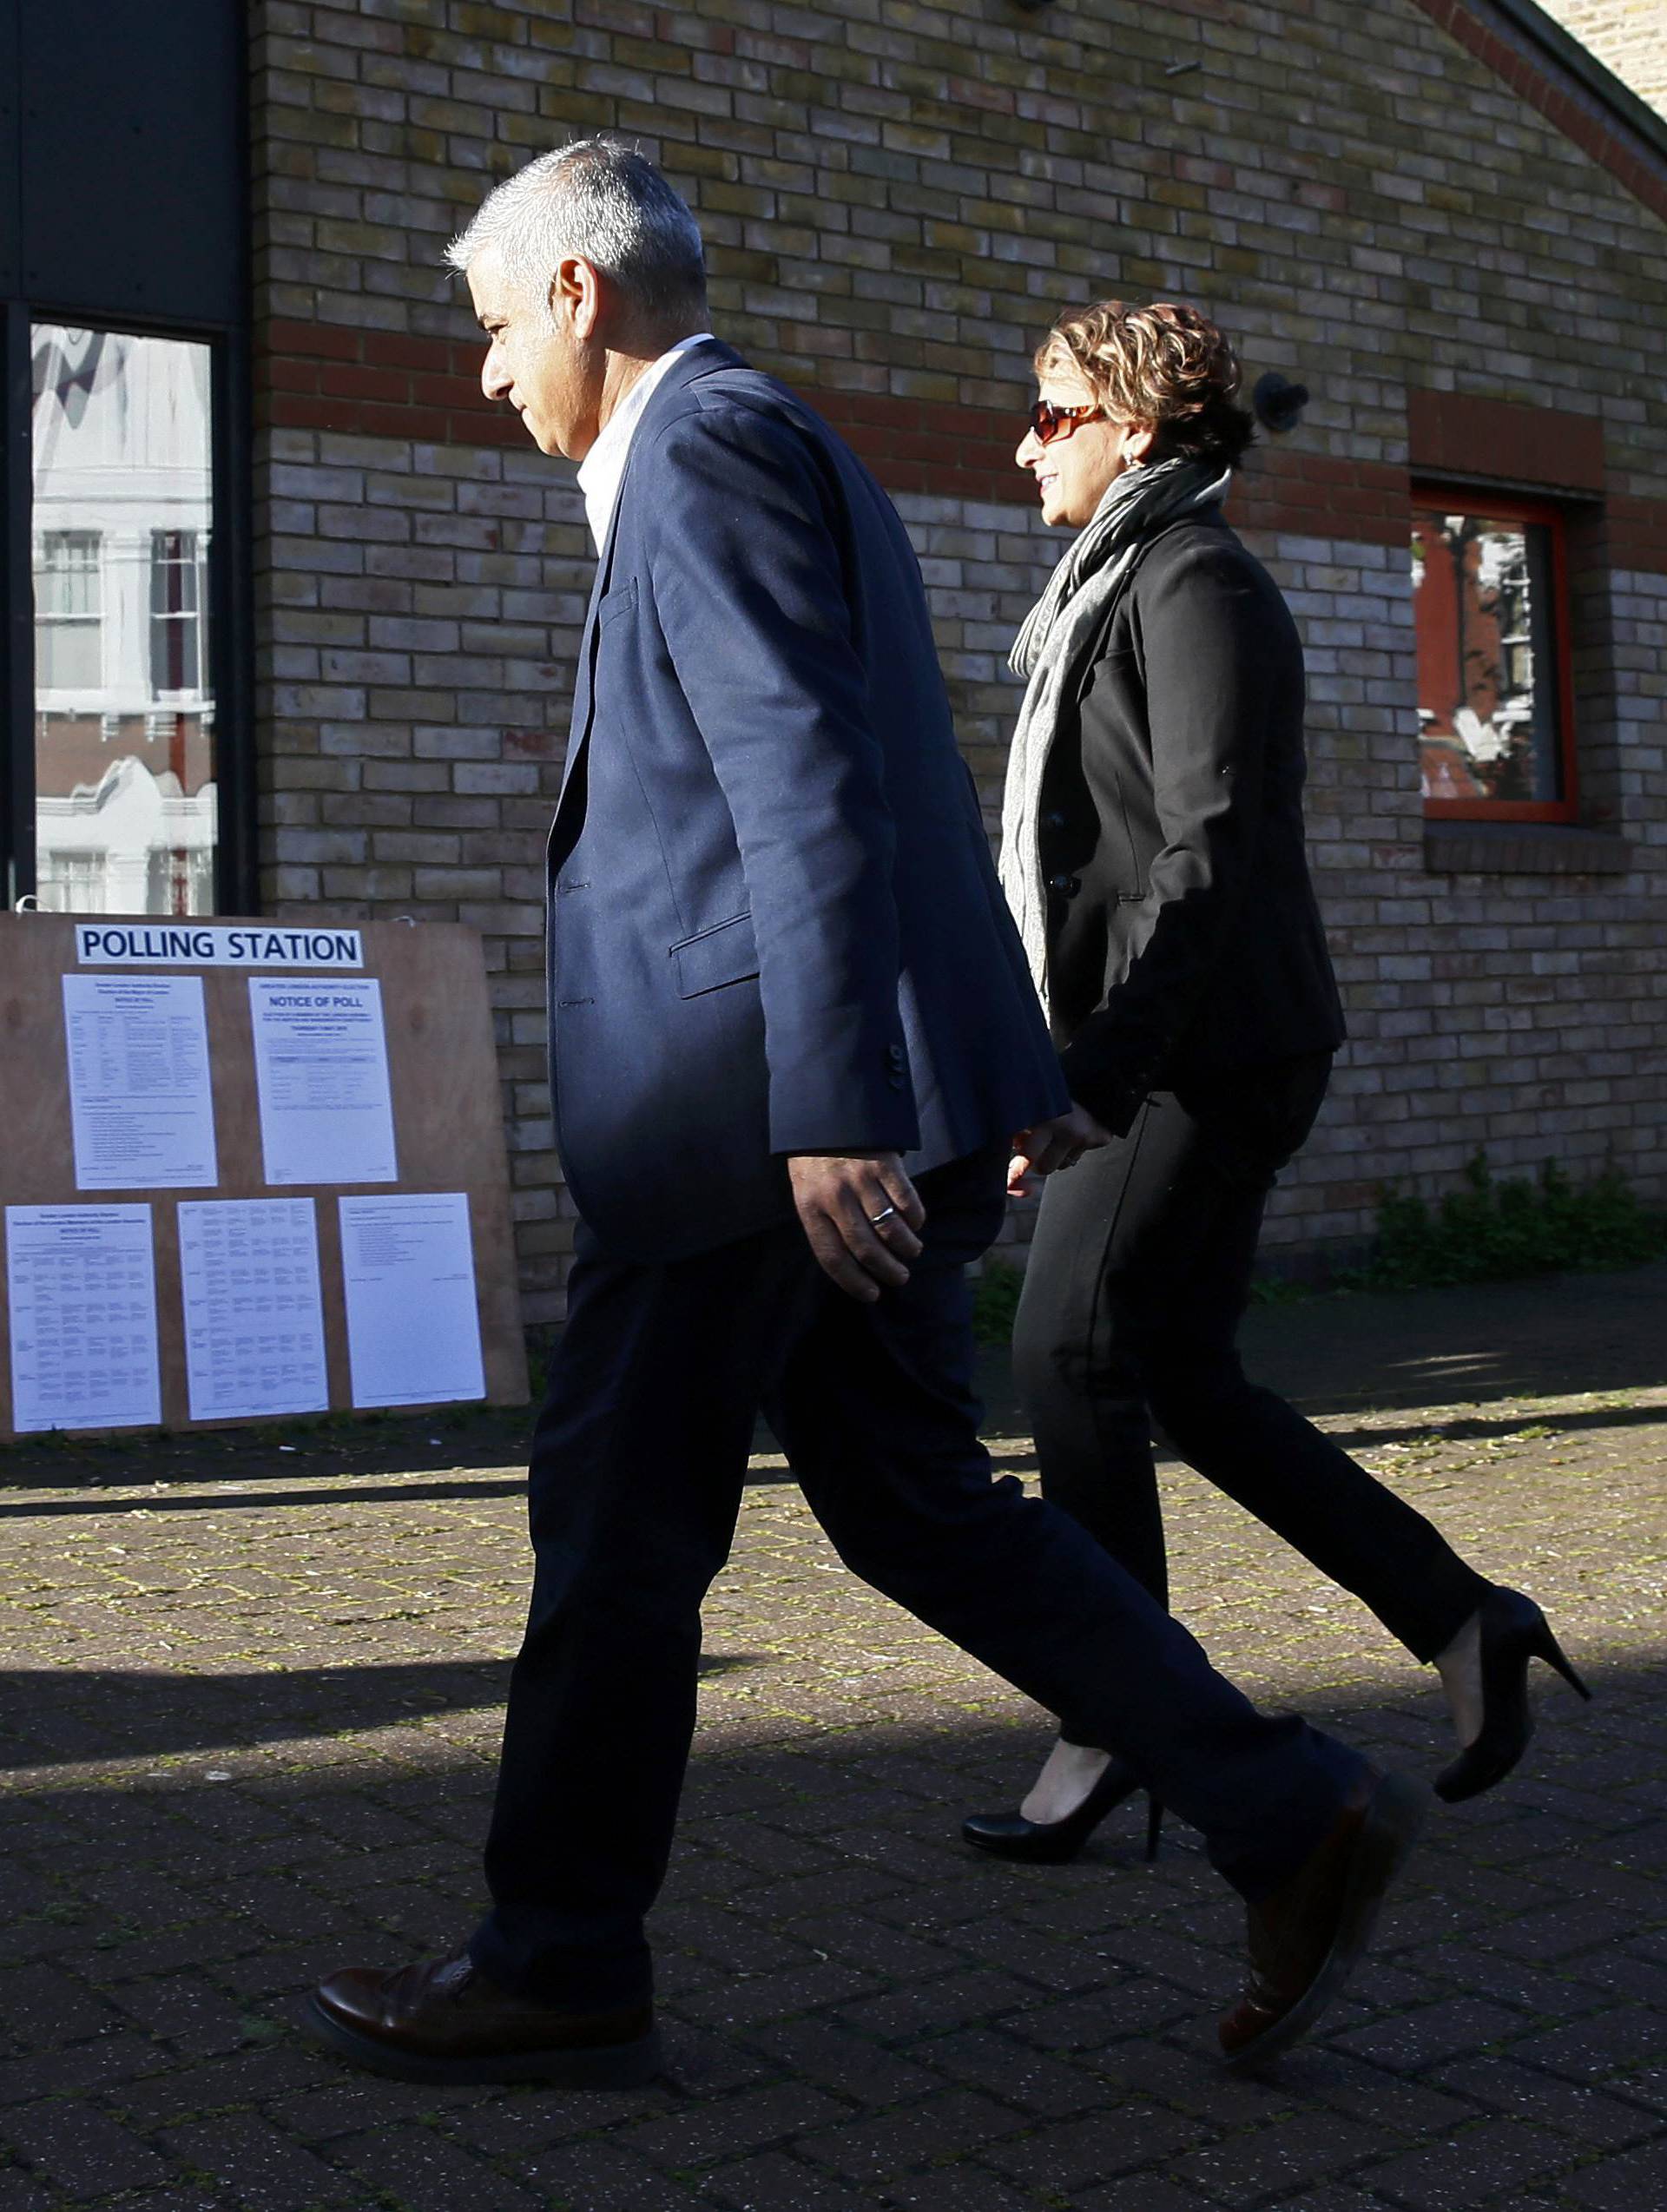 Khan, Britain's Labour Party candidate for Mayor of London and his wife Saadiya arrive to cast their votes for the London mayoral elections